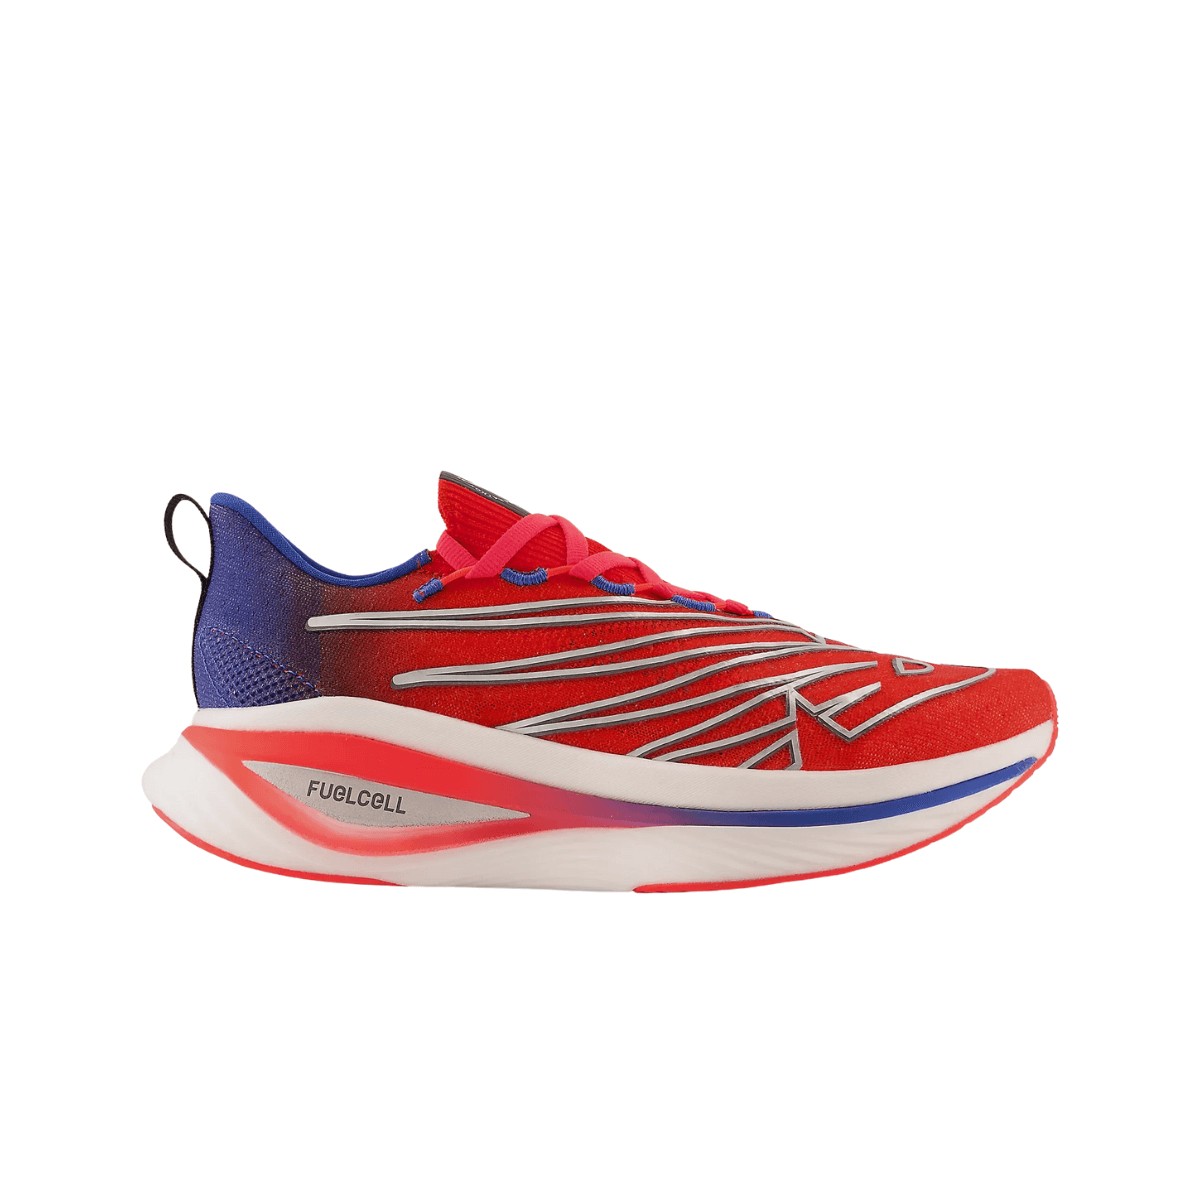 Shoes New Balance FuelCell SC Elite V3 NYC Marathon Red Blue AW22, Size 41,5 - EUR